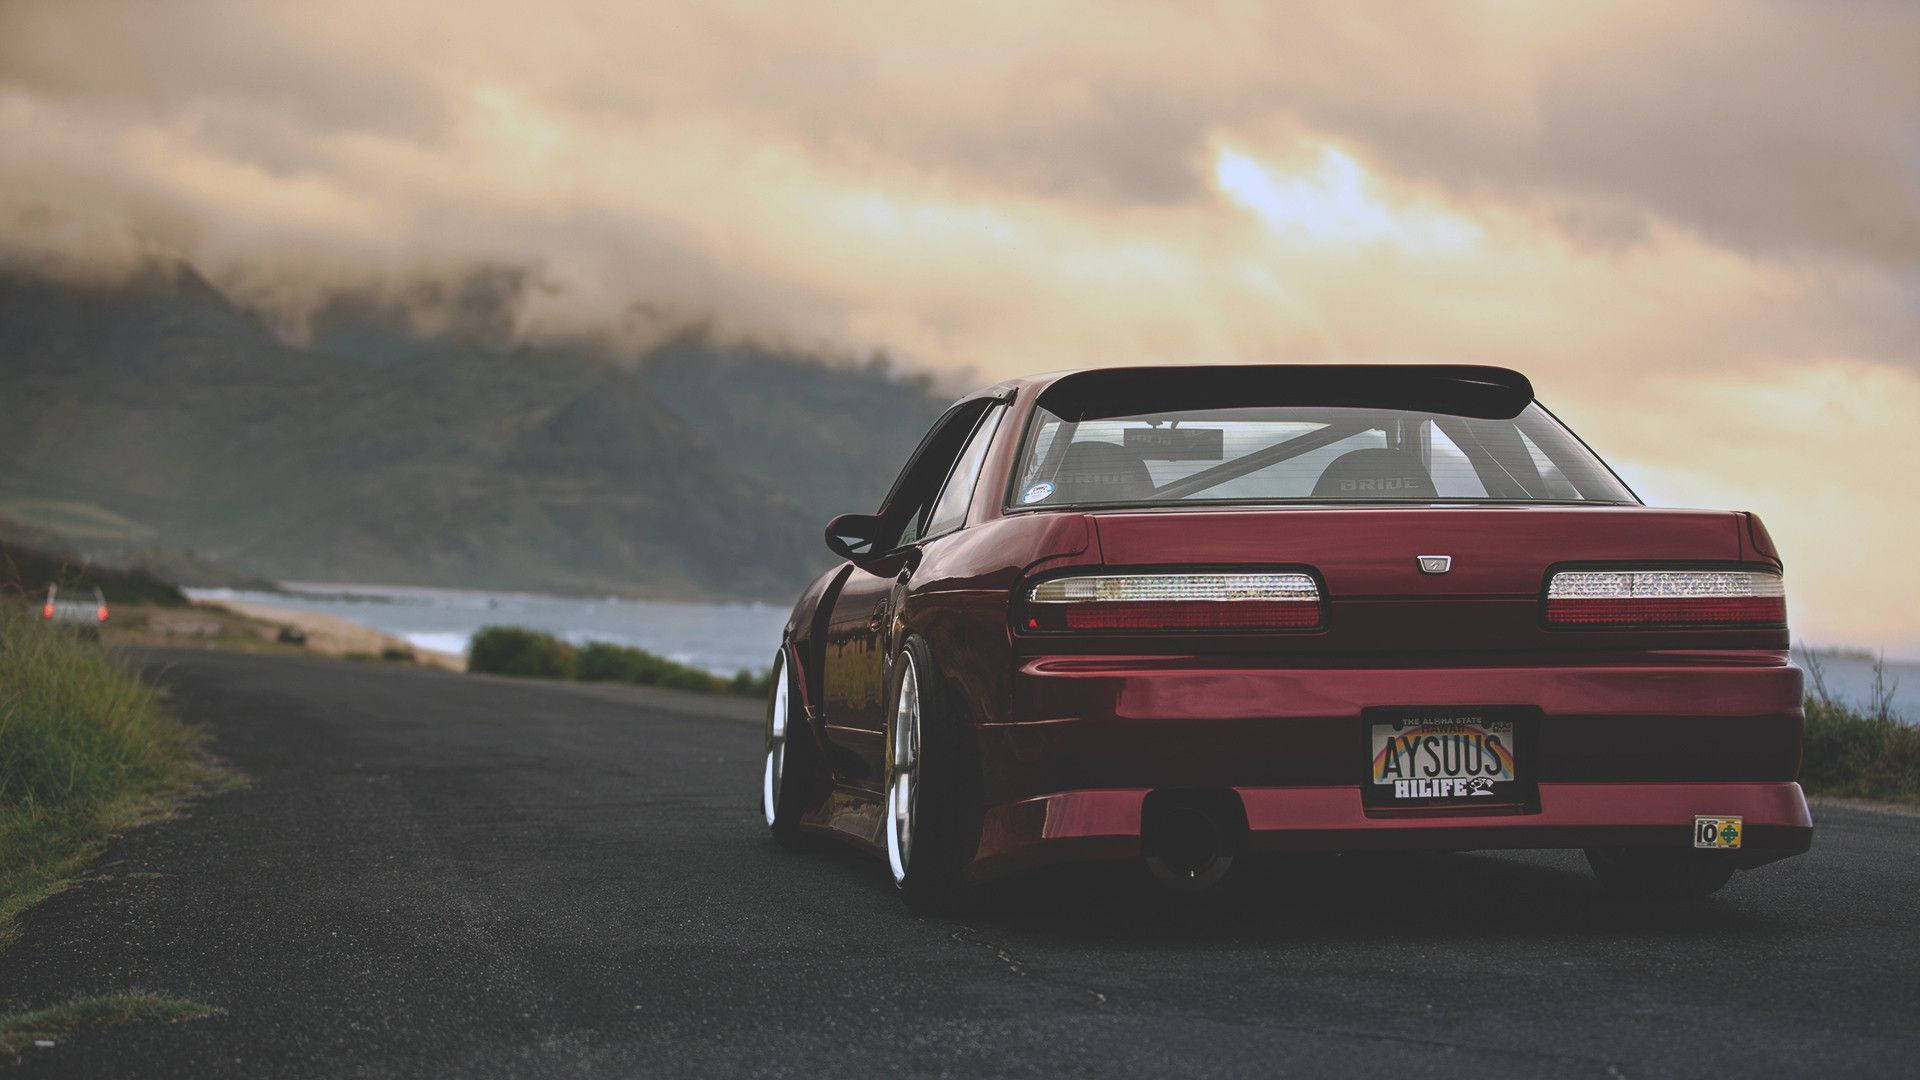 "Admiring the beauty of a Nissan Silvia S14" Wallpaper